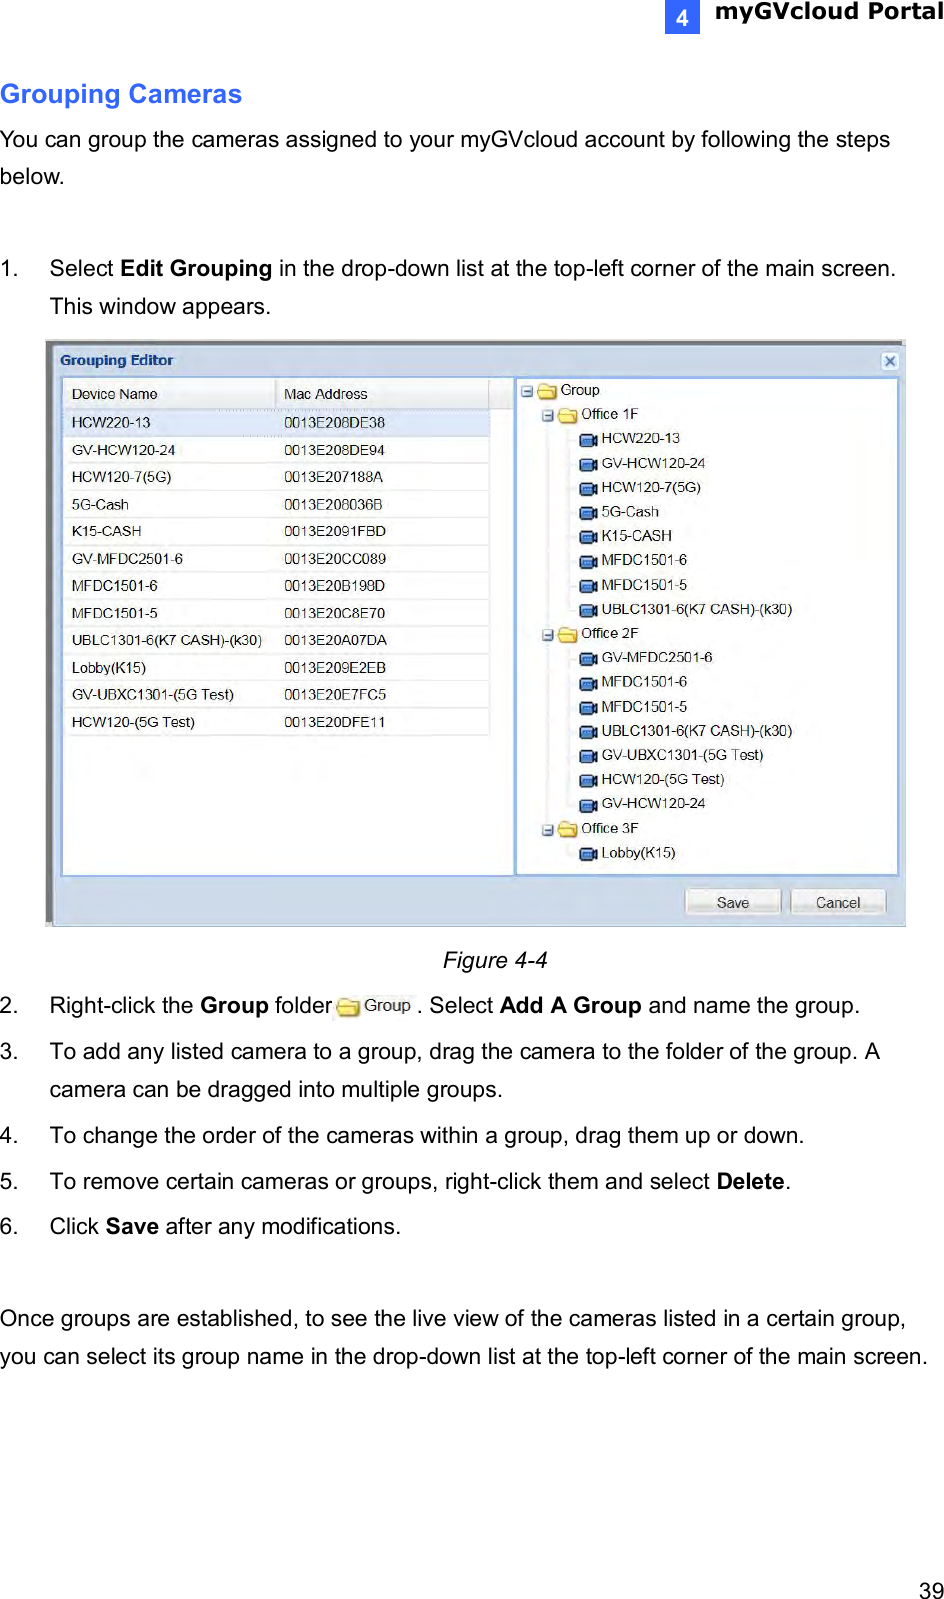  myGVcloud Portal    394 Grouping Cameras You can group the cameras assigned to your myGVcloud account by following the steps below.  1.  Select Edit Grouping in the drop-down list at the top-left corner of the main screen. This window appears.  Figure 4-4 2.  Right-click the Group folder . Select Add A Group and name the group. 3.  To add any listed camera to a group, drag the camera to the folder of the group. A camera can be dragged into multiple groups.   4.  To change the order of the cameras within a group, drag them up or down. 5.  To remove certain cameras or groups, right-click them and select Delete. 6.  Click Save after any modifications.  Once groups are established, to see the live view of the cameras listed in a certain group, you can select its group name in the drop-down list at the top-left corner of the main screen.    